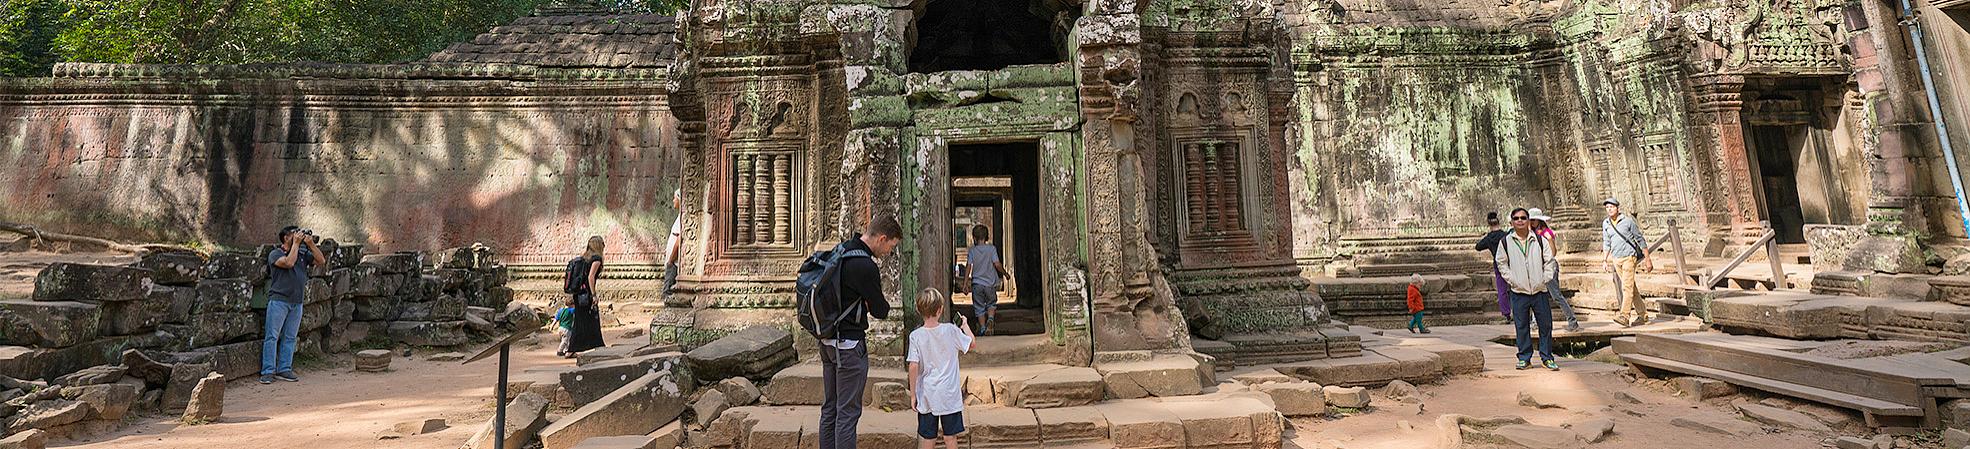 10 Best Things to Do in Cambodia